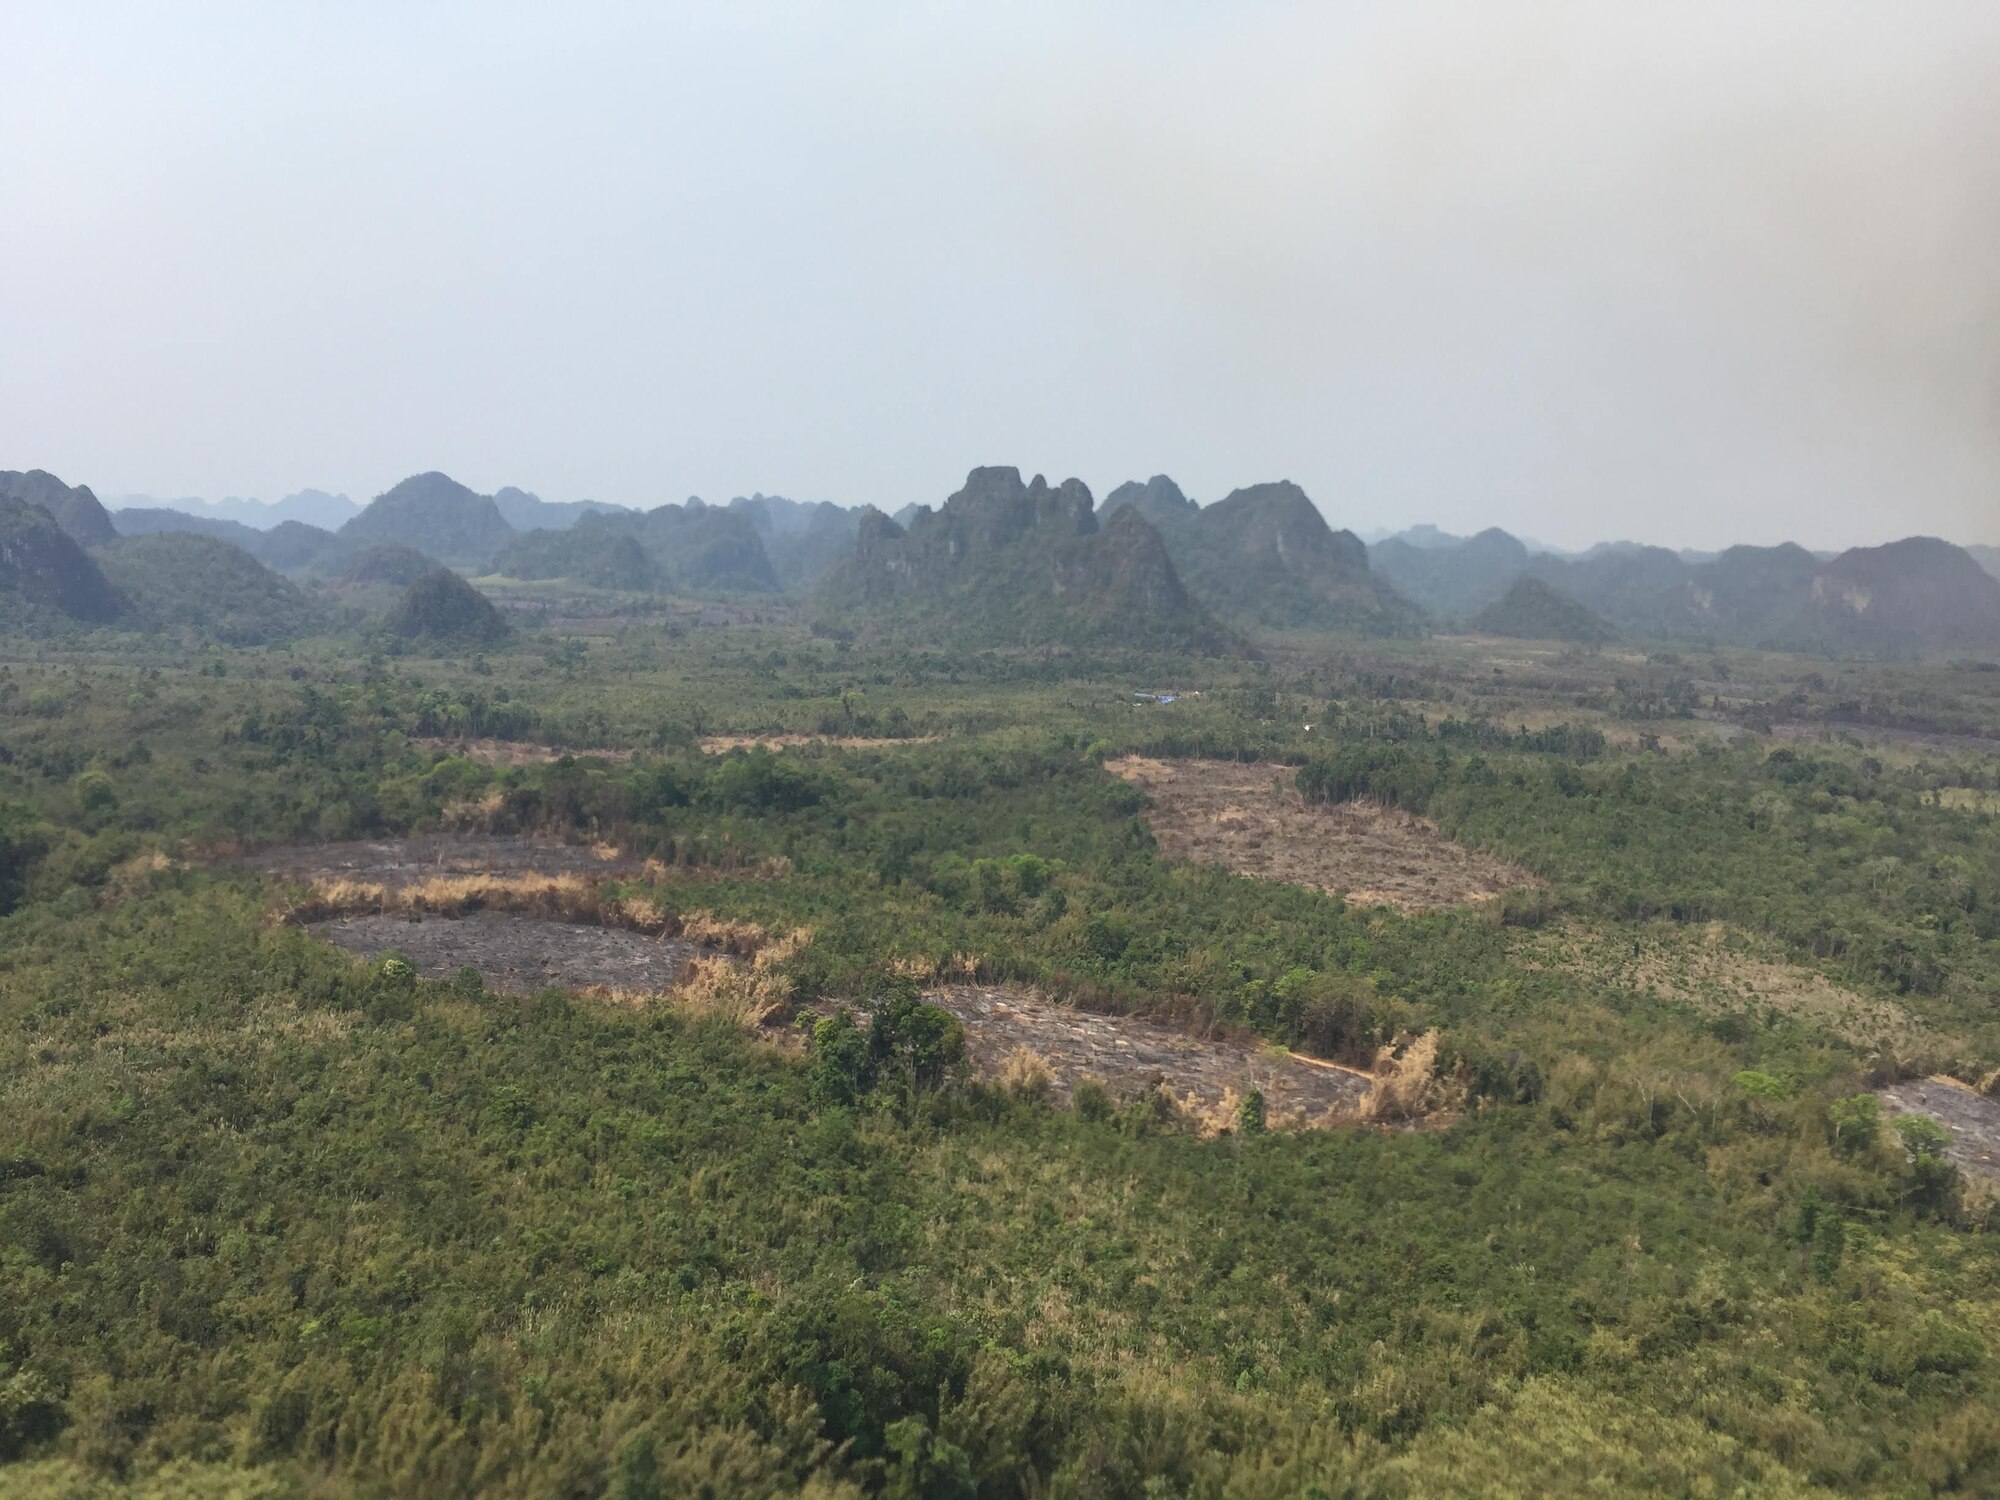 The main base camp for Recovery Team One rests in a field March 12, 2019, in the country of Lao People’s Democratic Republic. The Defense Prisoner of War/Missing in Action Accounting Agency deploys agency teams to countries throughout Asia, the Pacific, Europe and to the United States to recover fallen or missing service members. (Courtesy Photo)